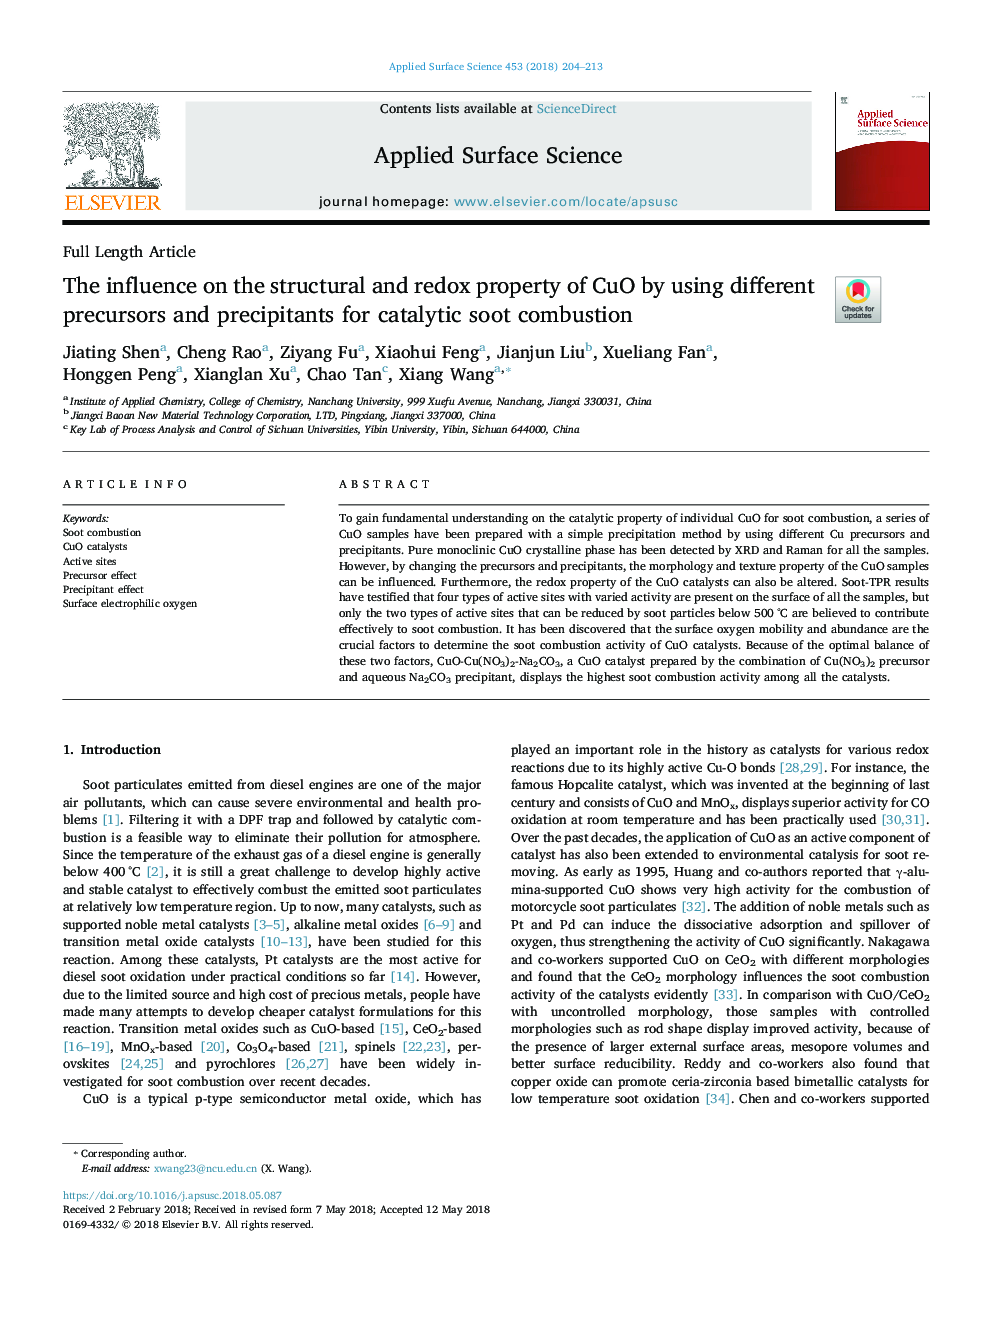 The influence on the structural and redox property of CuO by using different precursors and precipitants for catalytic soot combustion